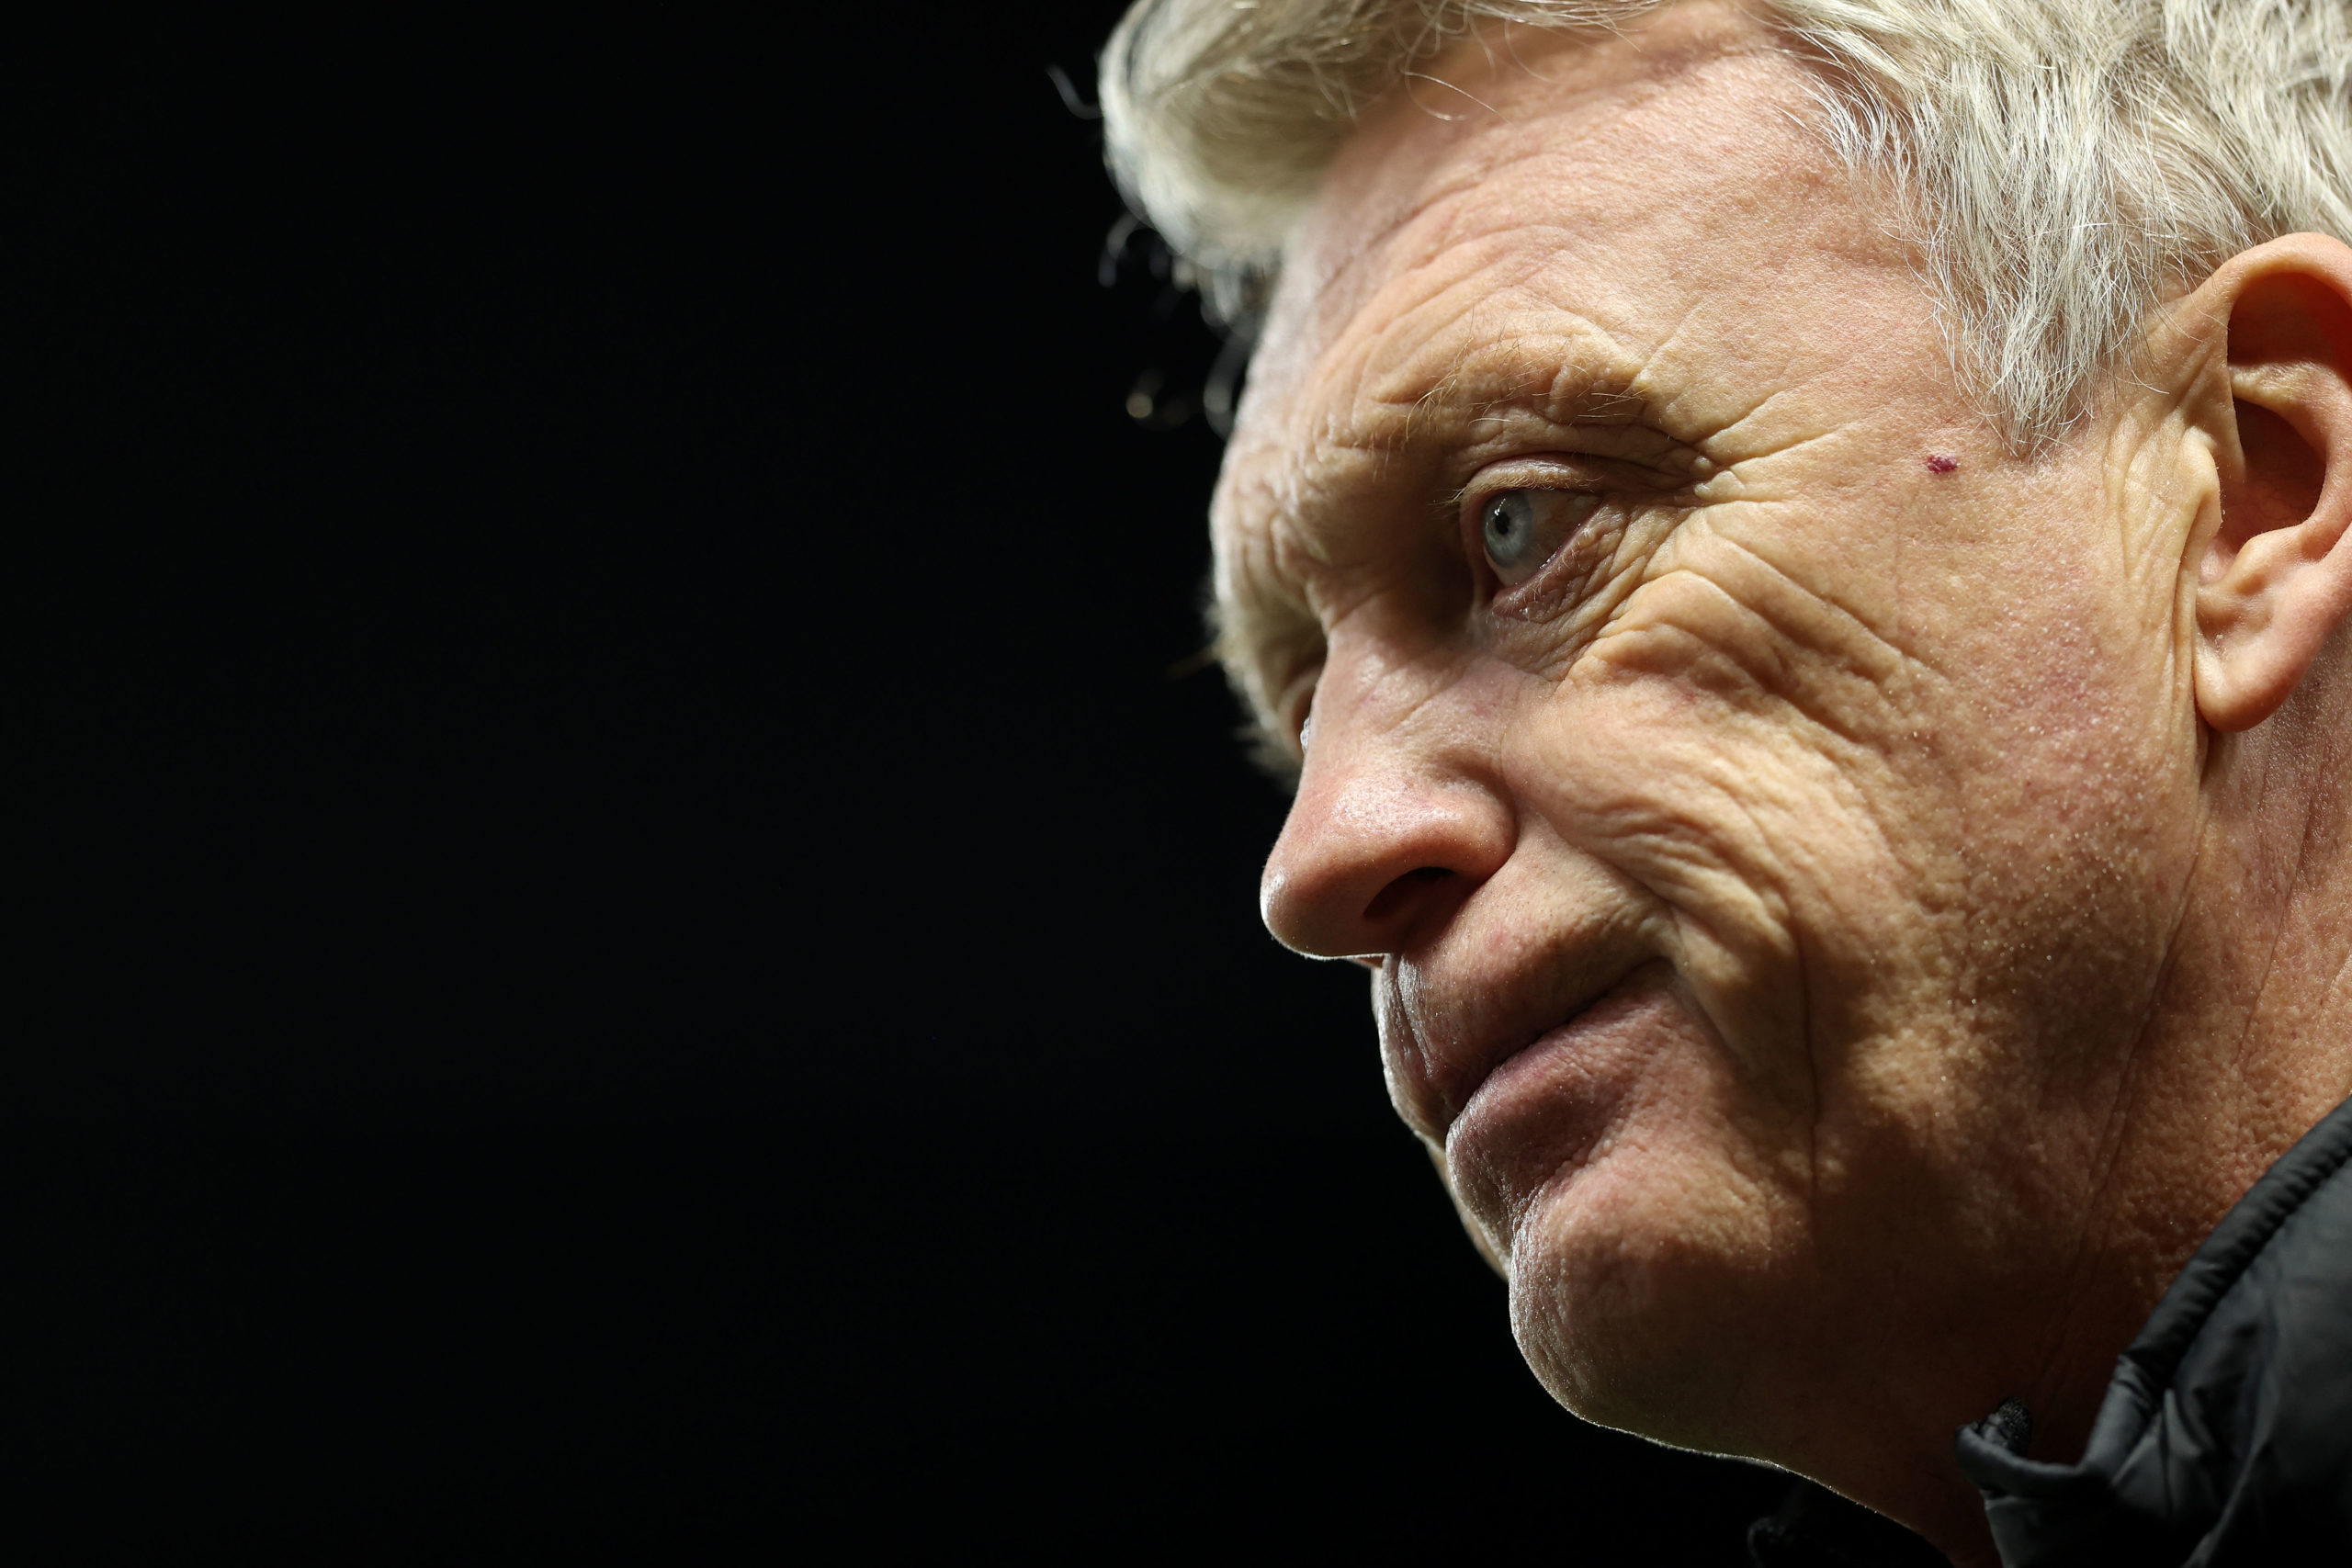 David Moyes says he wants owners to spend money in two key areas at West Ham